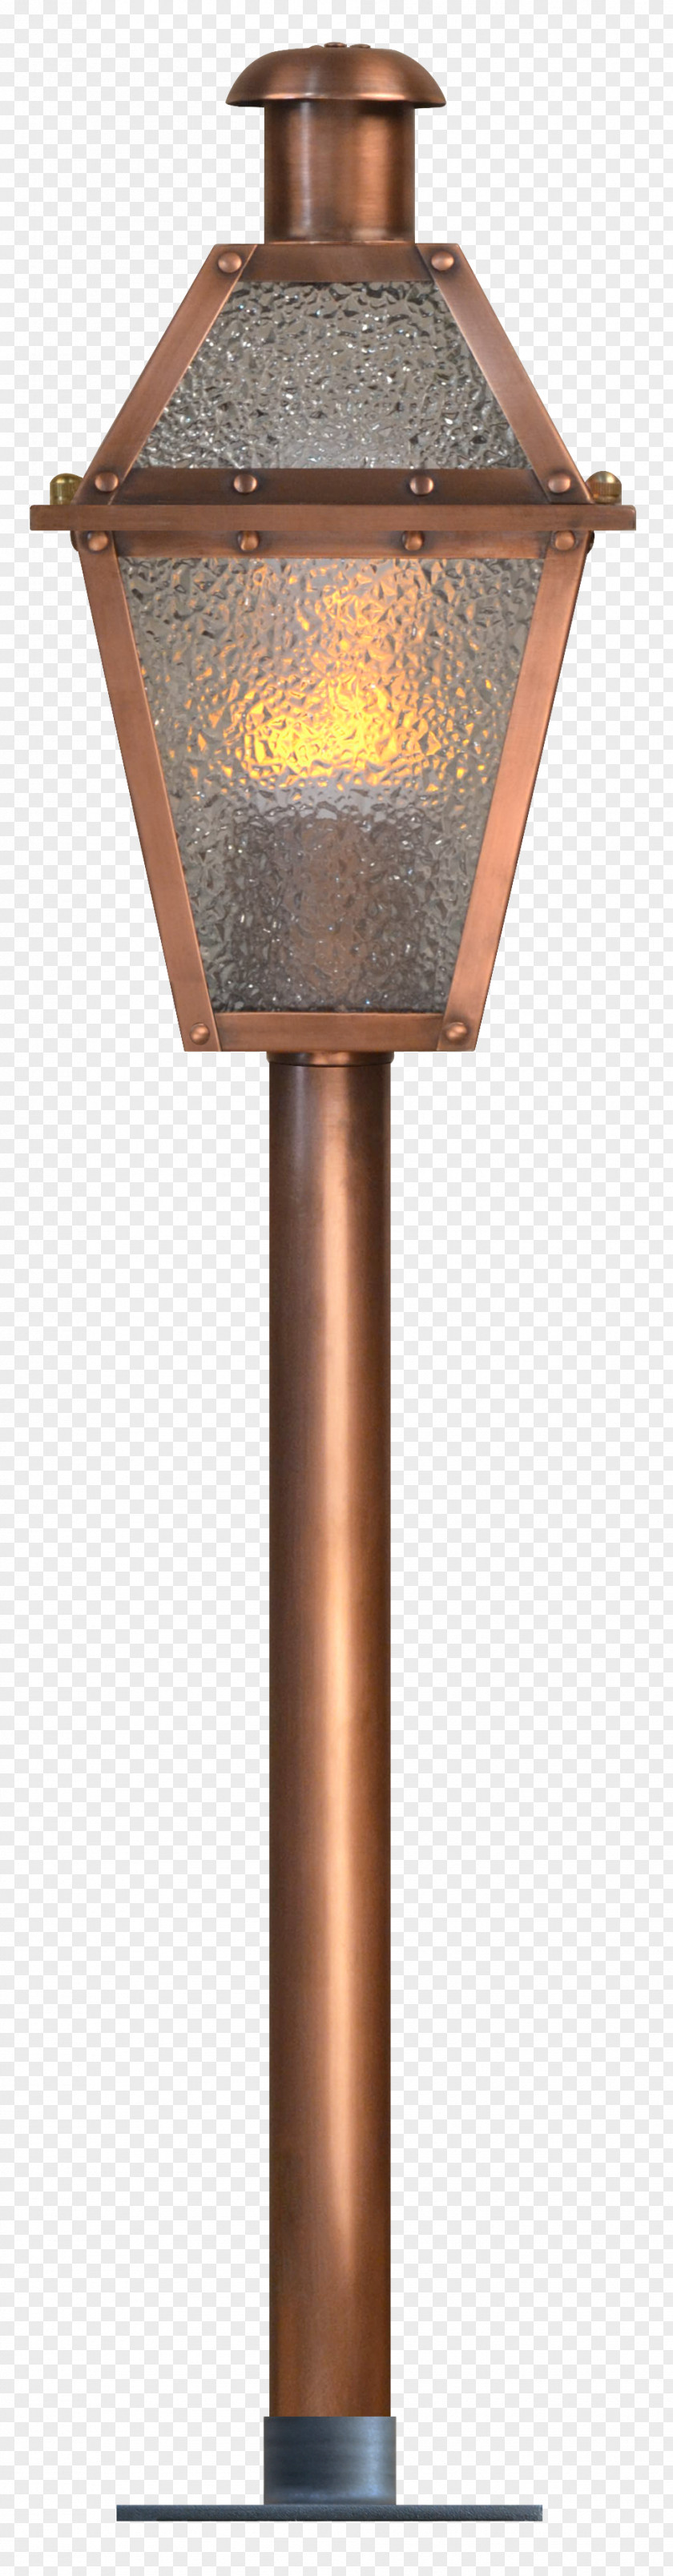 Pathway Landscape Lighting Lantern Coppersmith PNG